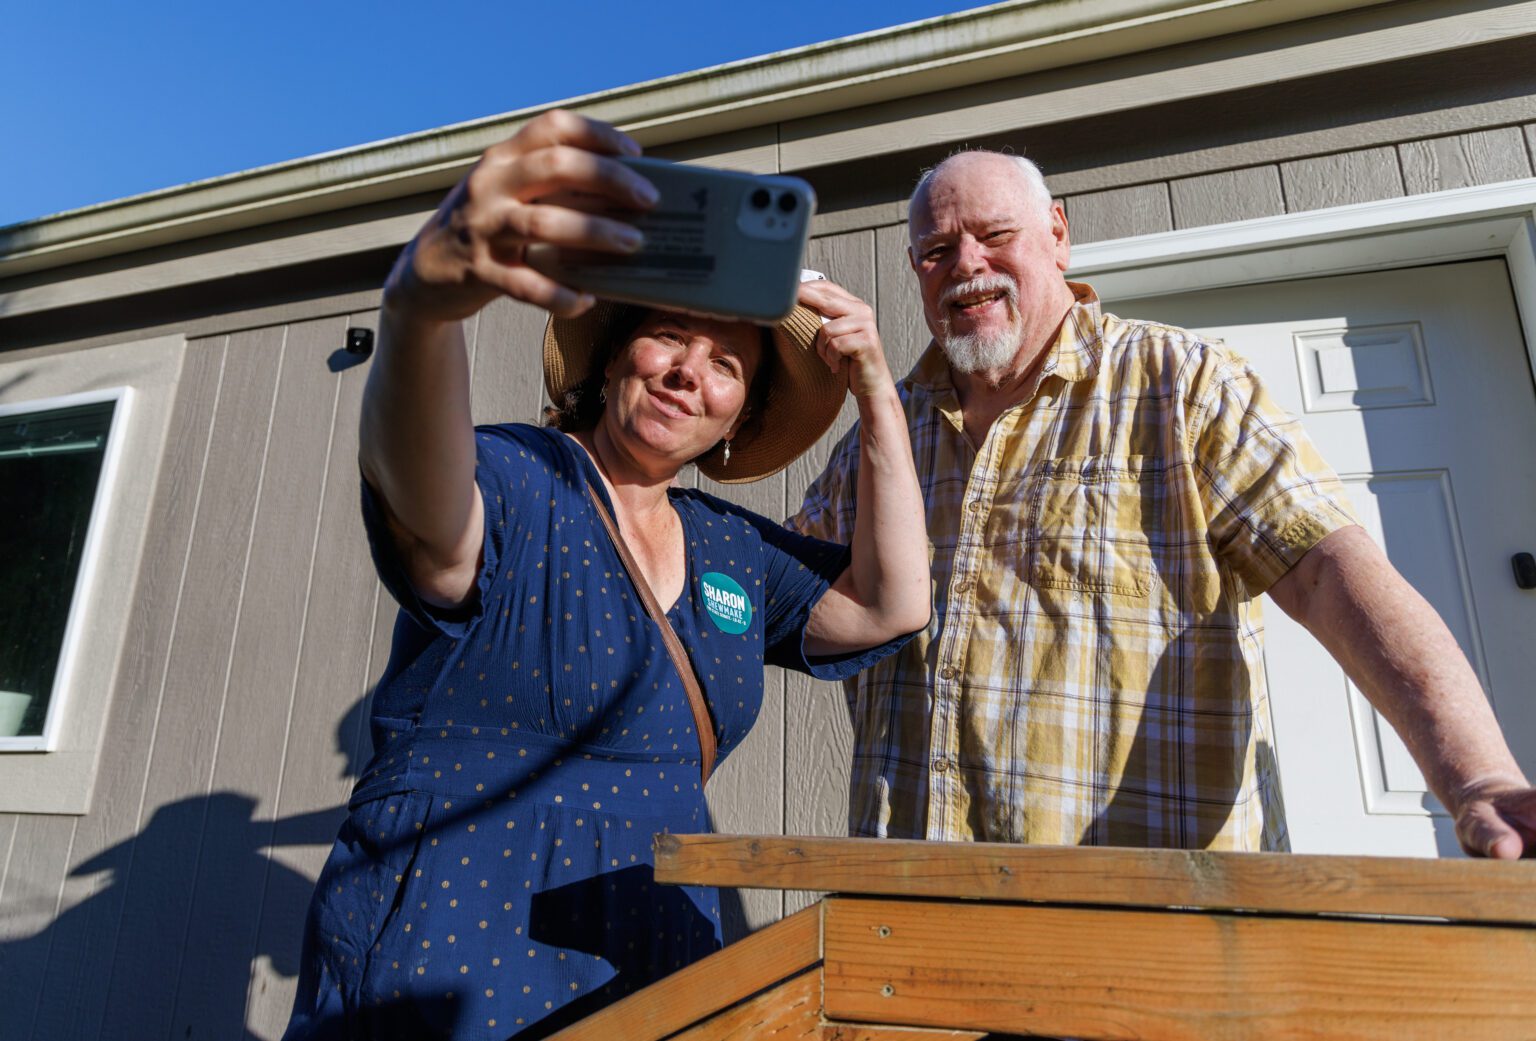 Sharon Shewmake takes a selfie with supporter Steve Hodel while campaigning in Birch Bay on July 27. Shewmake and her team knocked on more than 20